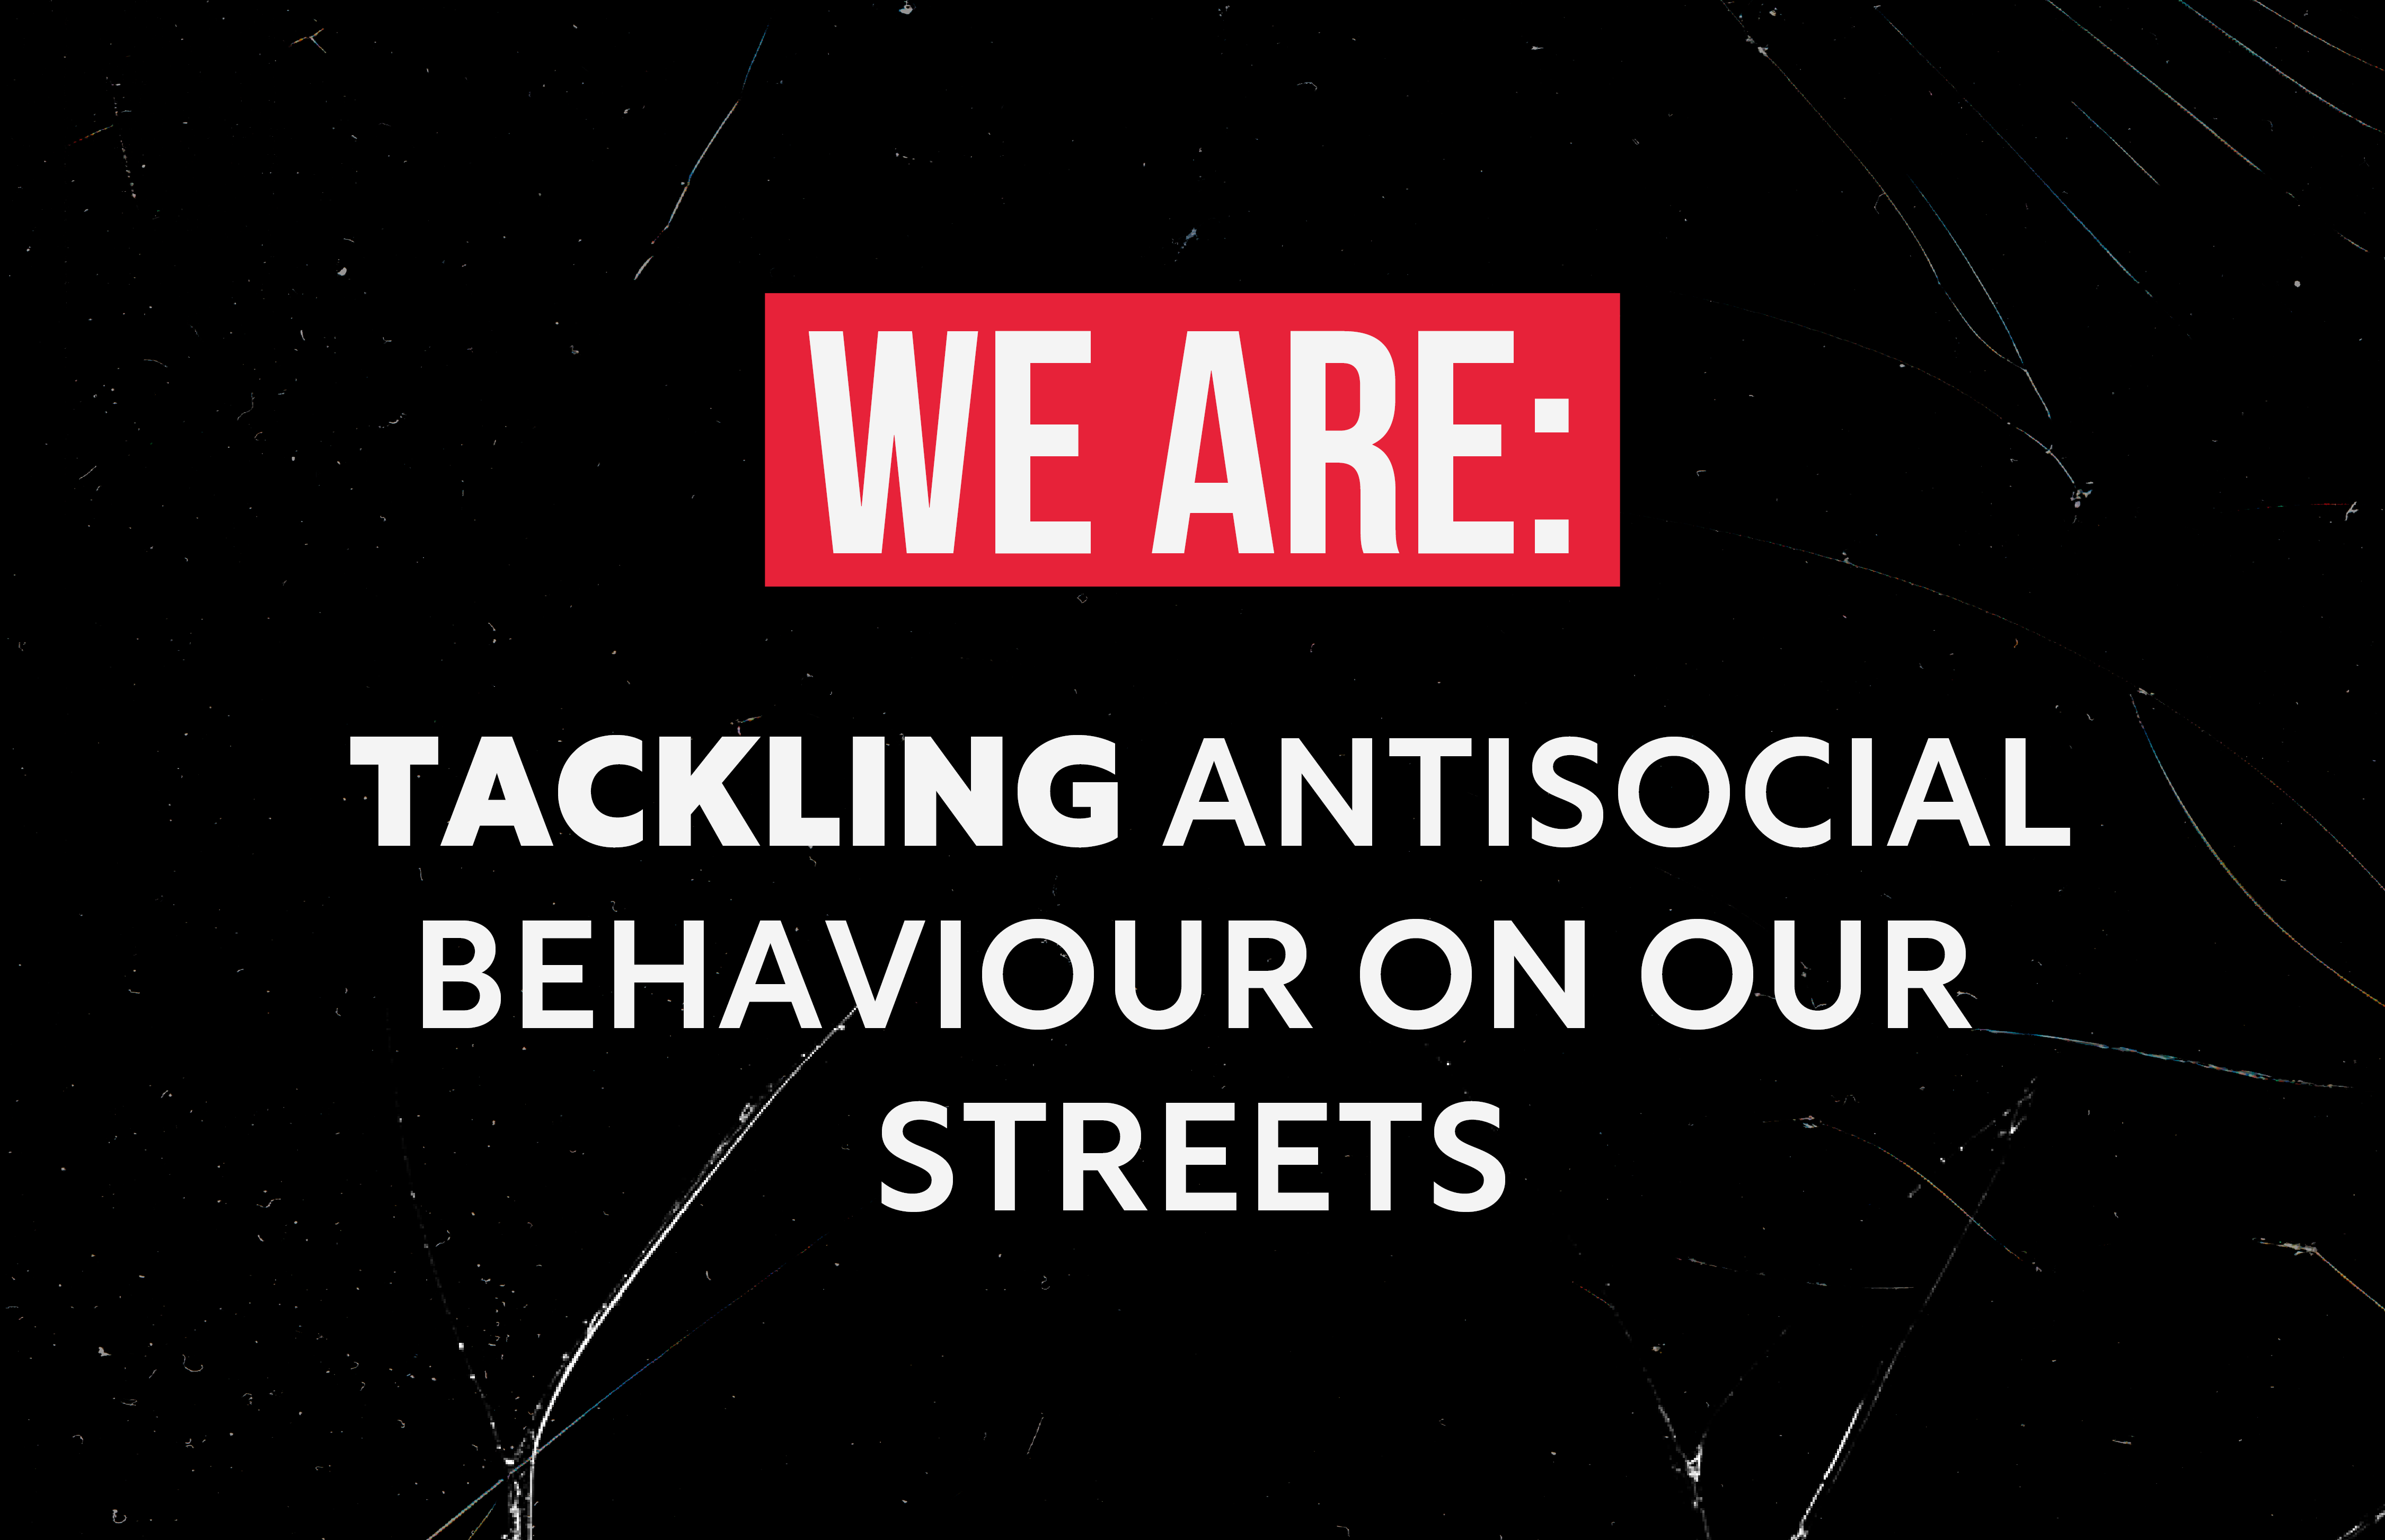 We are tackling antisocial behaviour on our streets